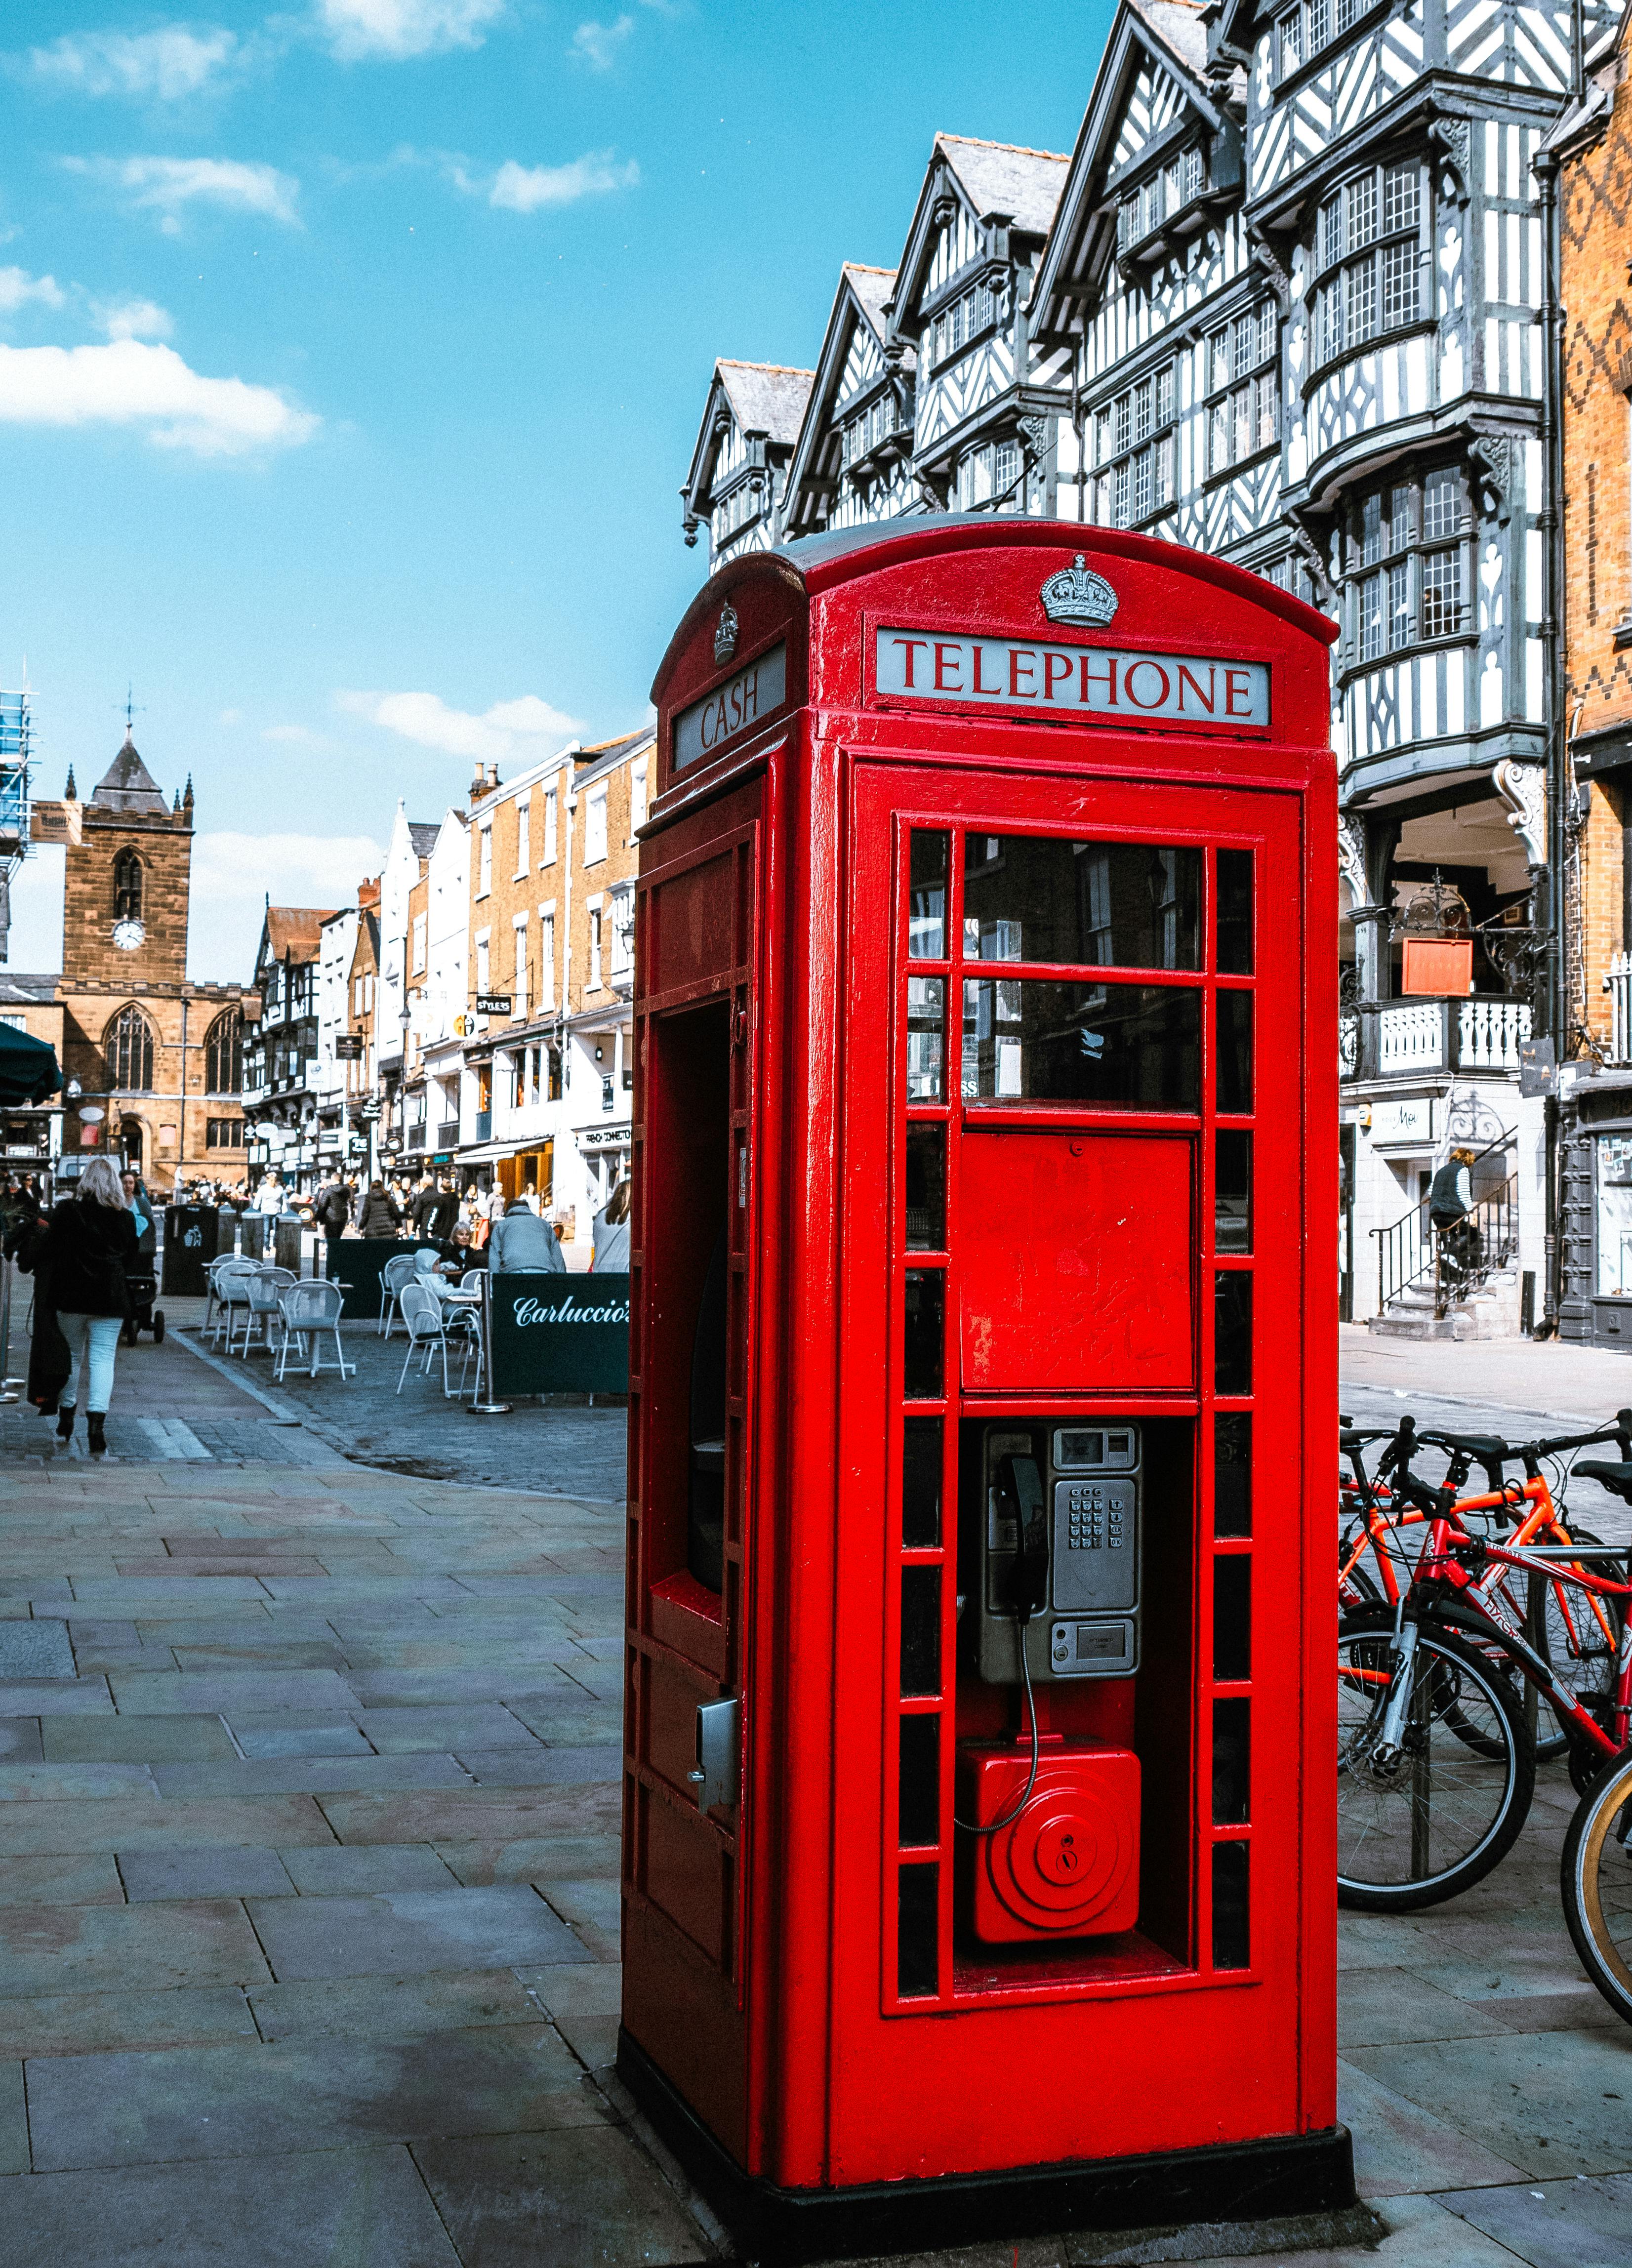 10914 London Phone Booth Images Stock Photos  Vectors  Shutterstock